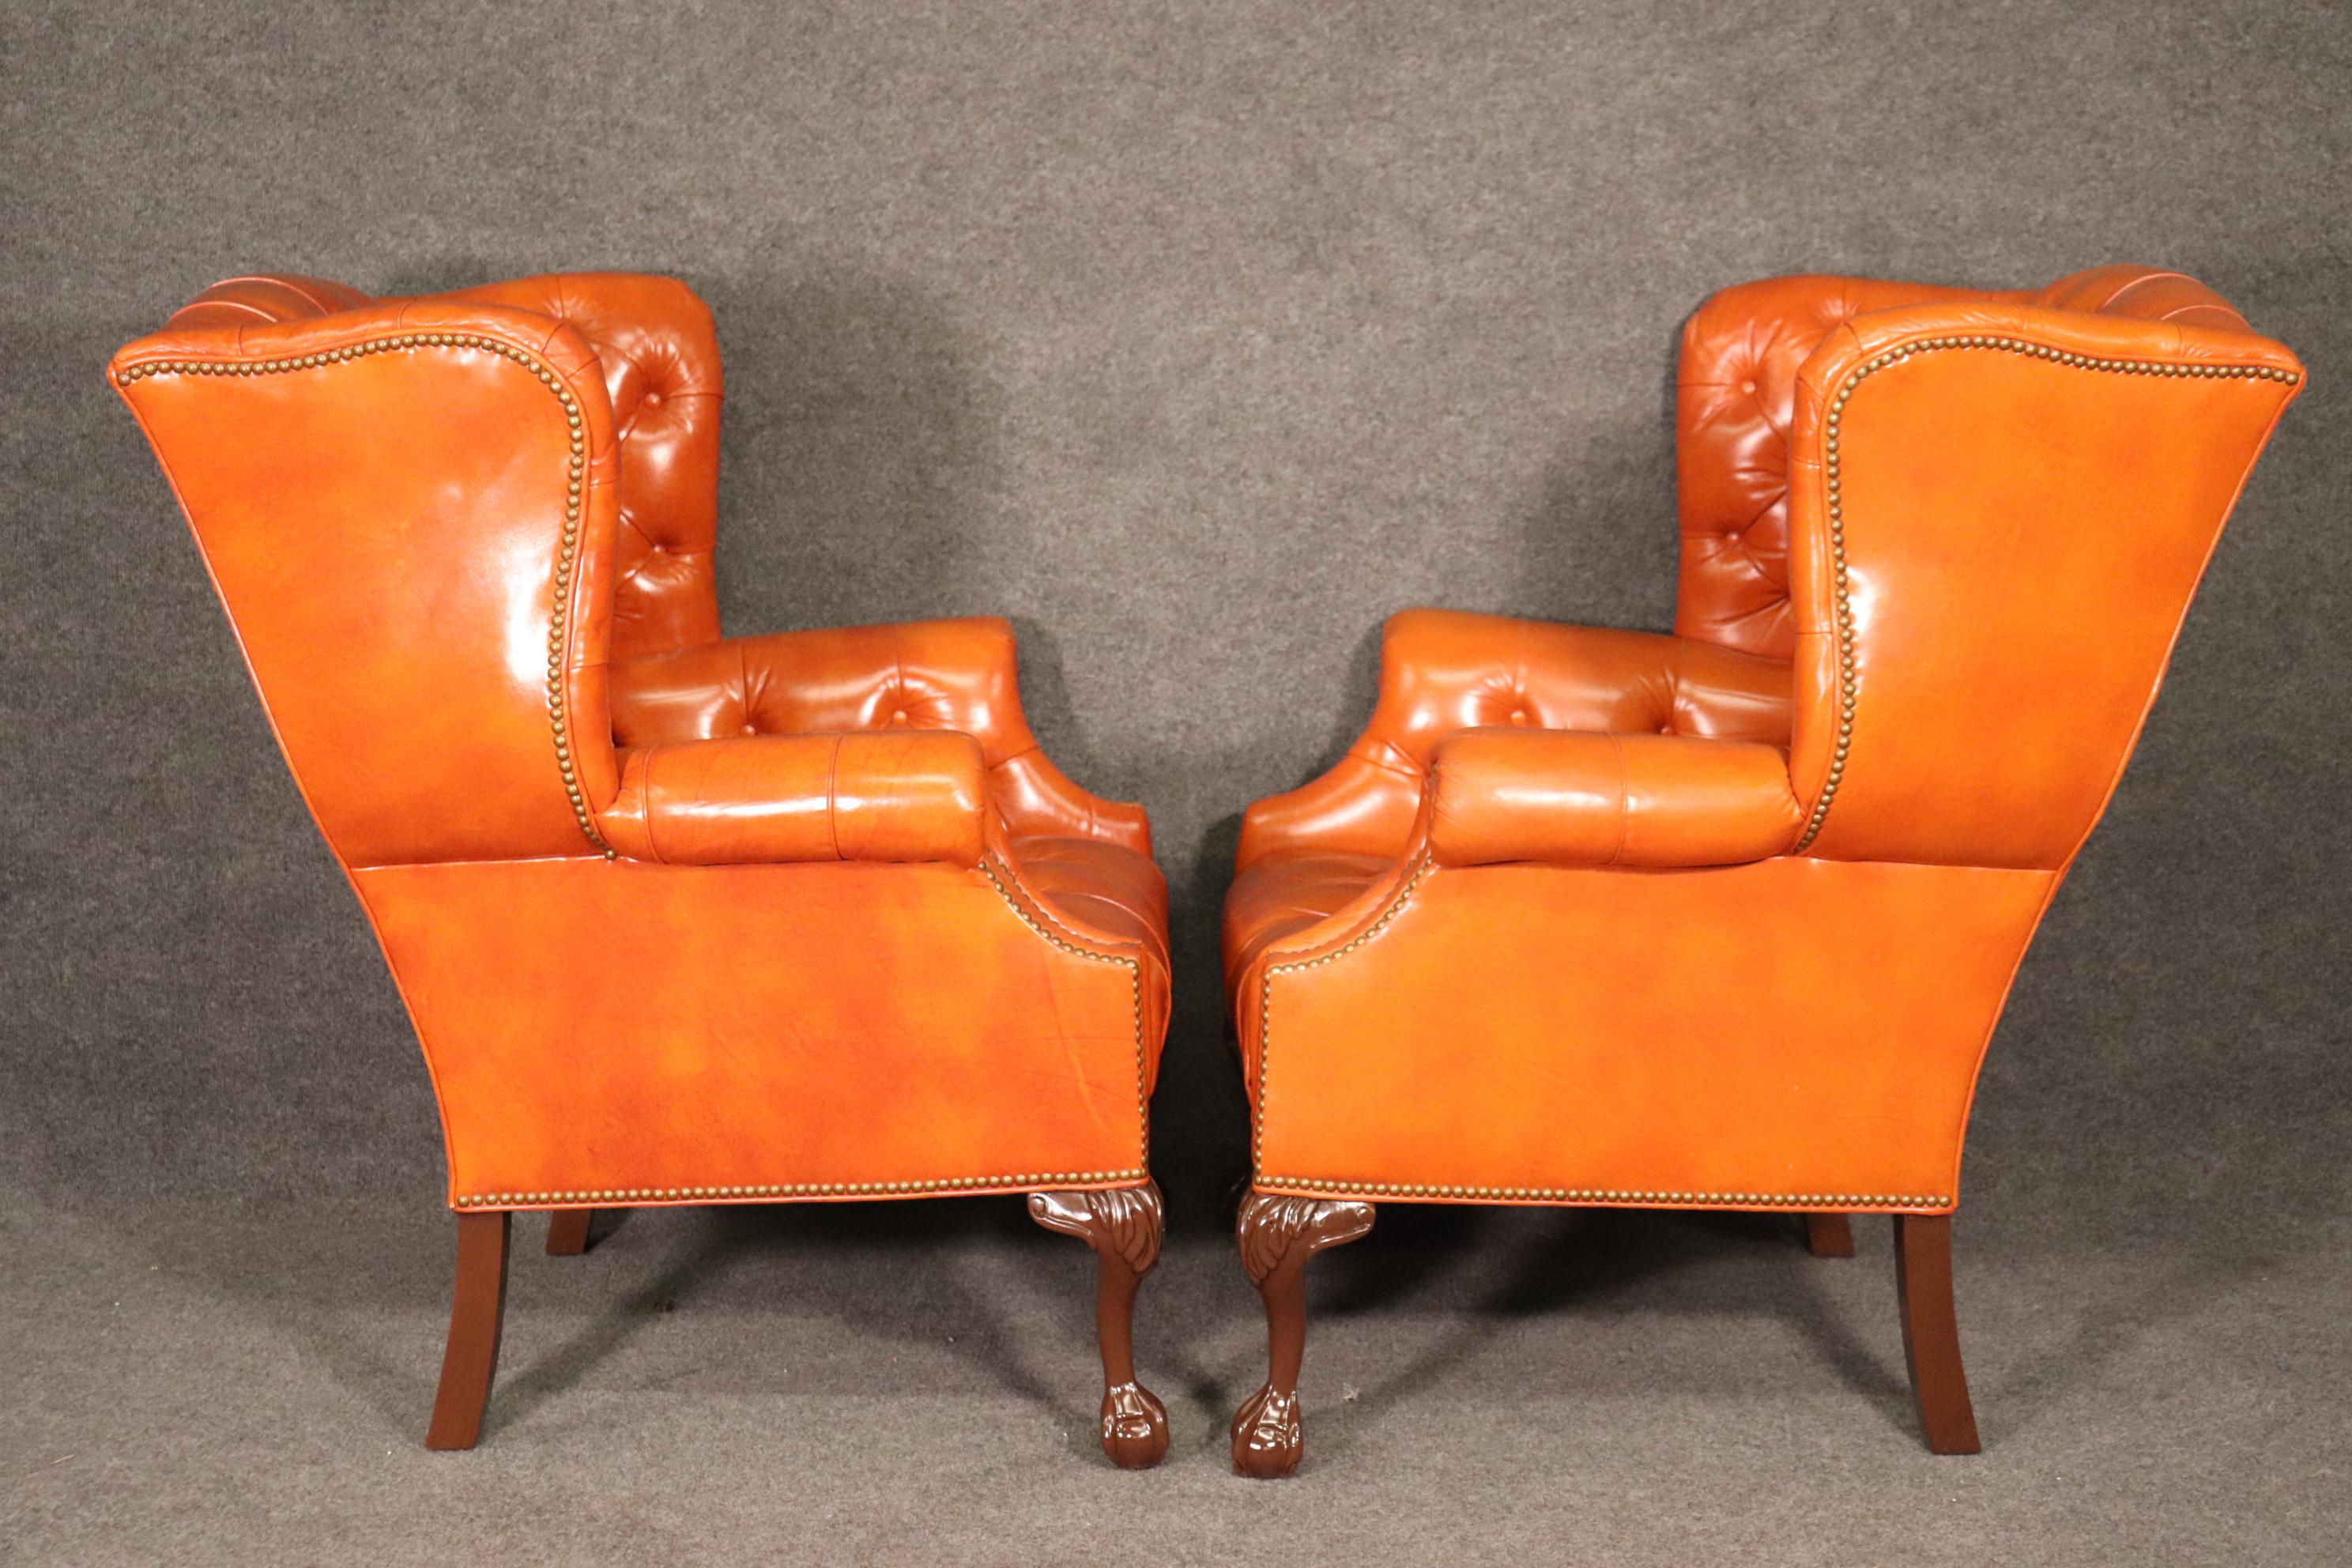 Mid-20th Century Very Nice Pair of Orange Chesterfield Wing Back Chairs with one stool